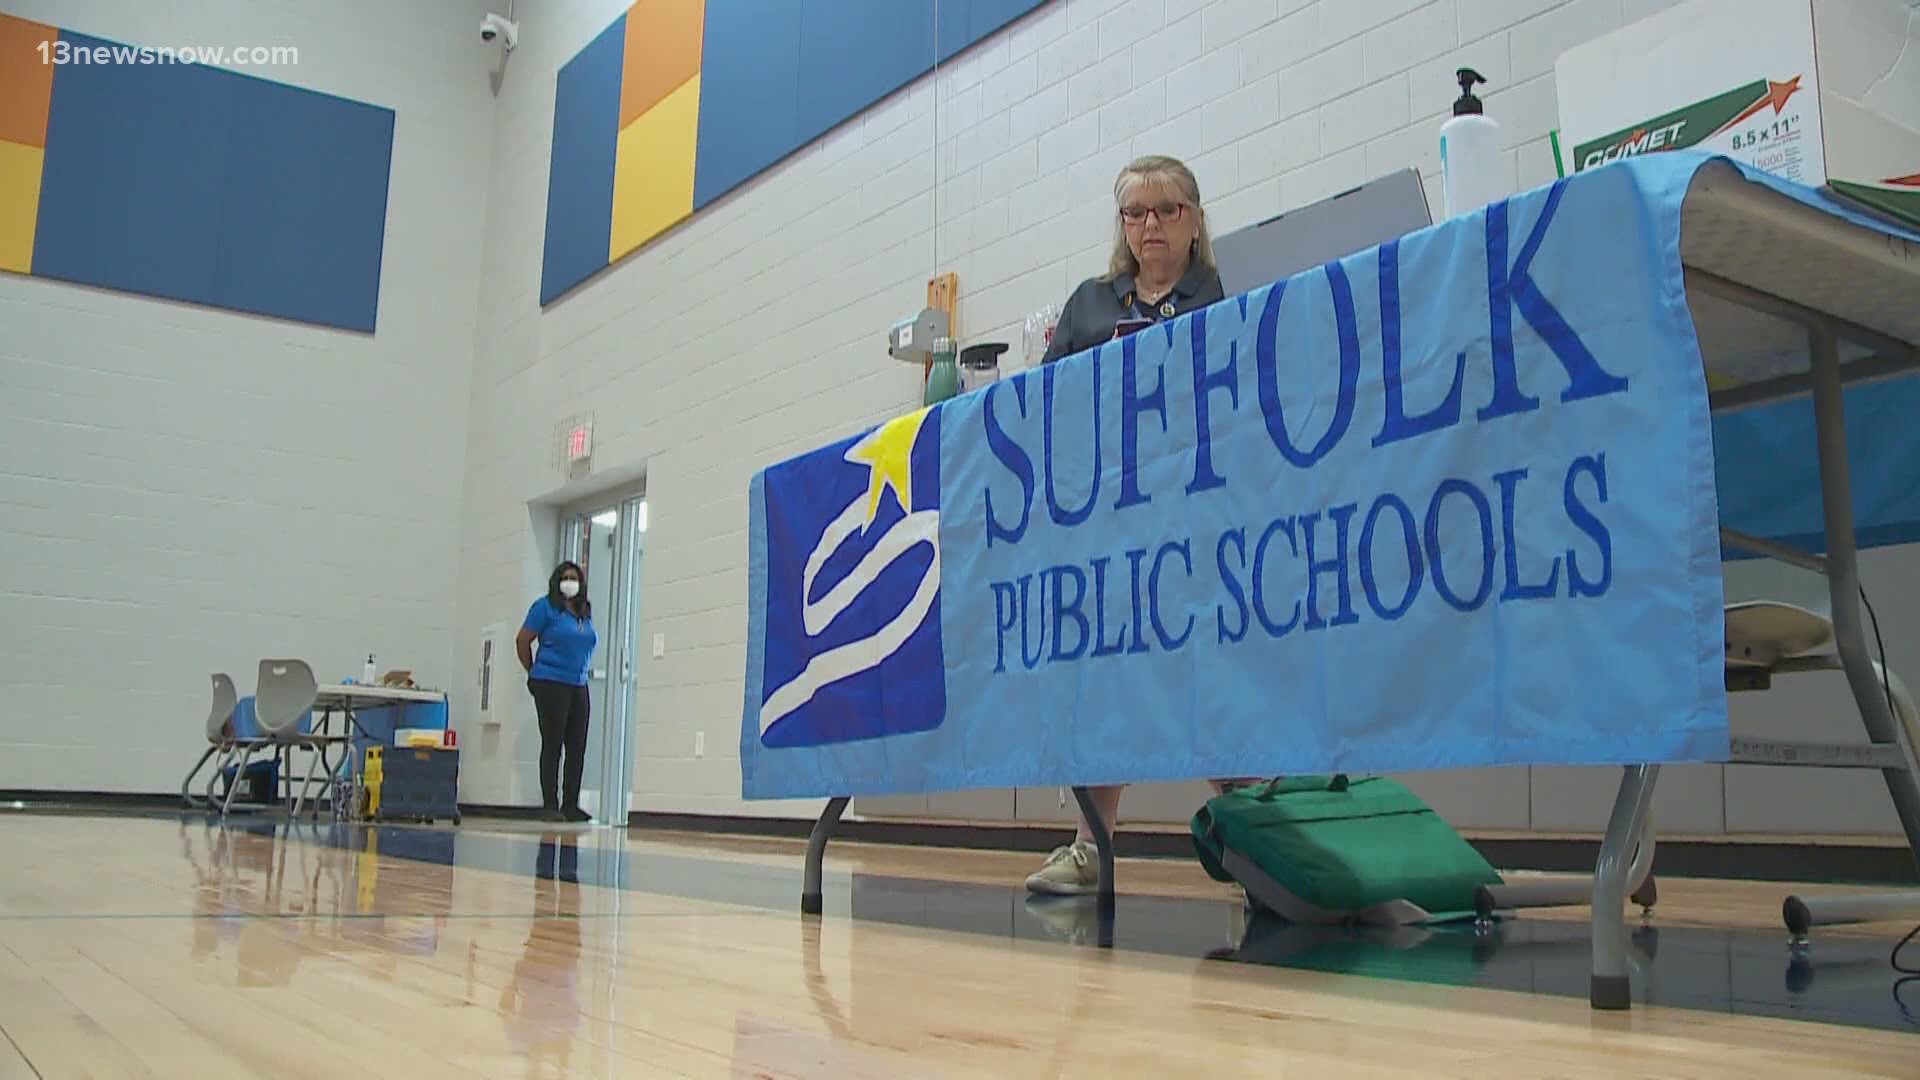 Not one person showed up at Tuesday's bus driver job fair in Suffolk.